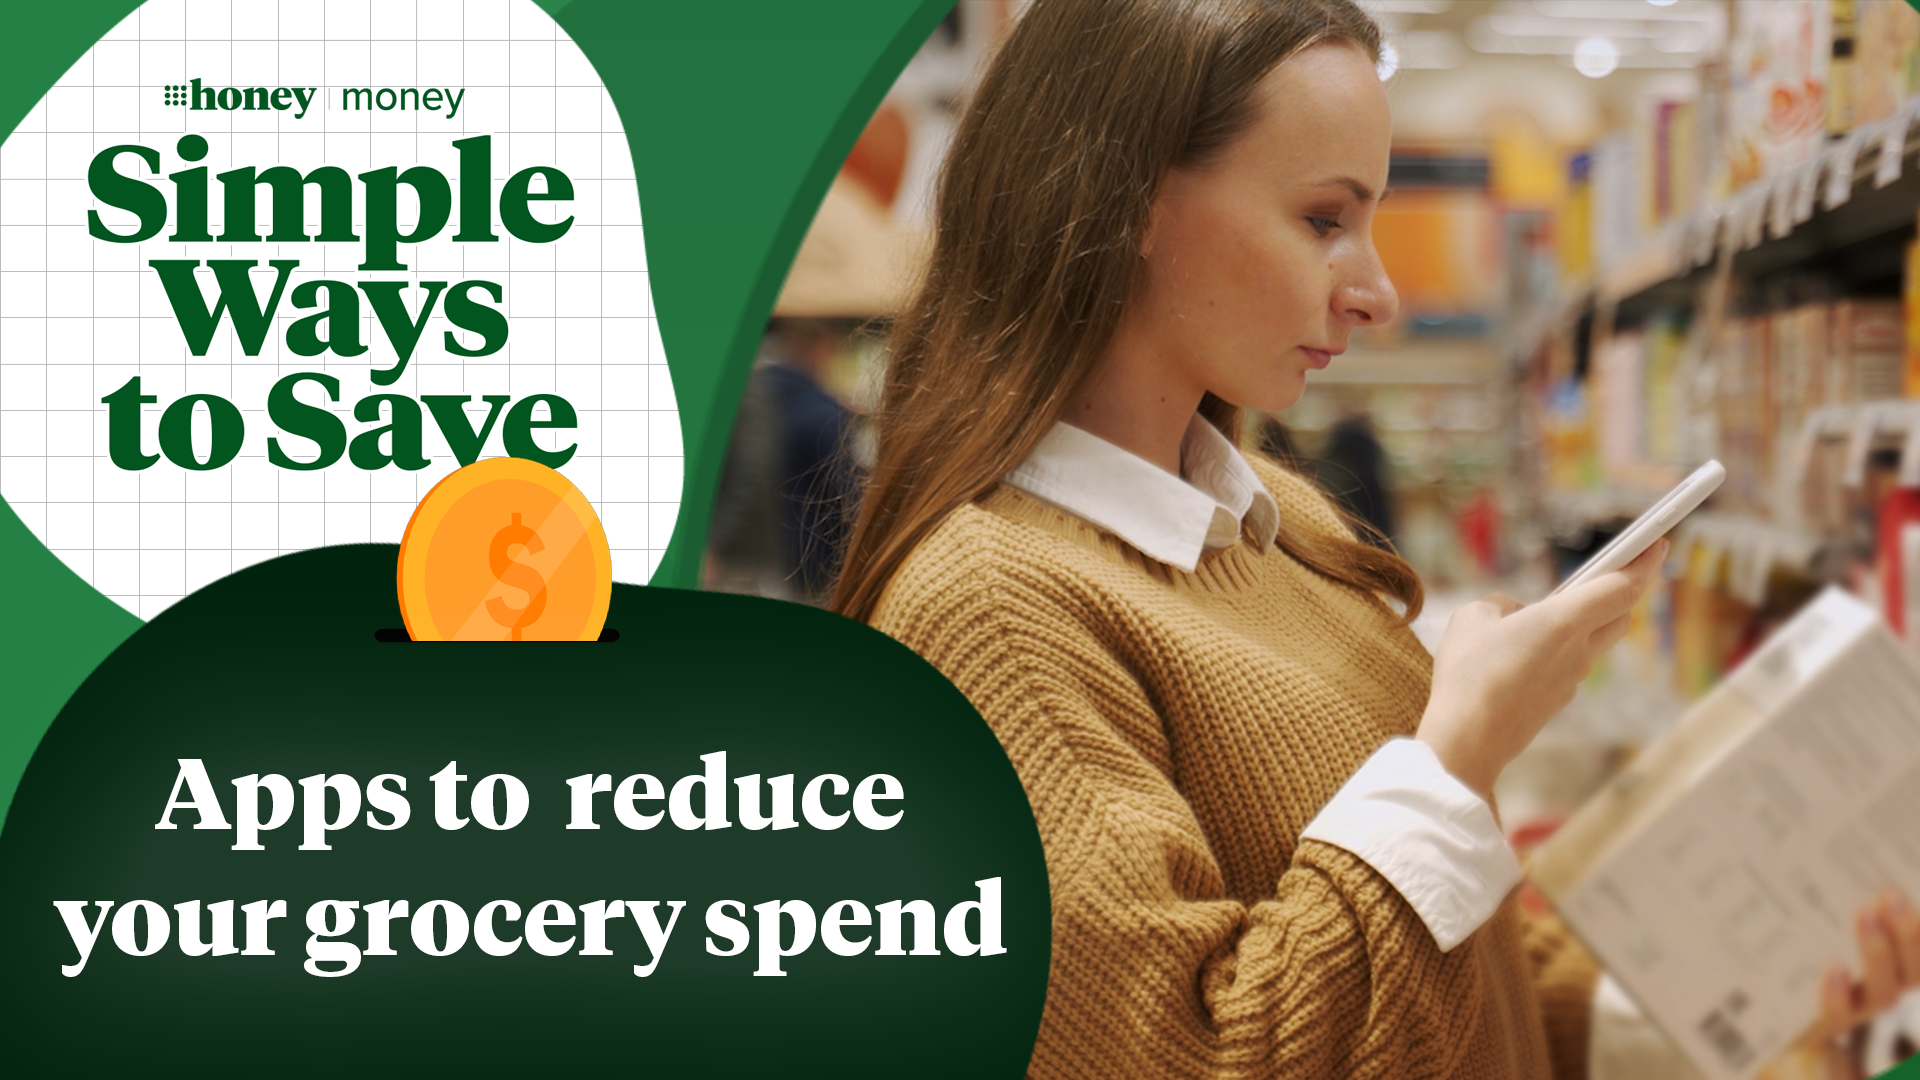 Simple Ways to Save: Apps to help you reduce your grocery spend